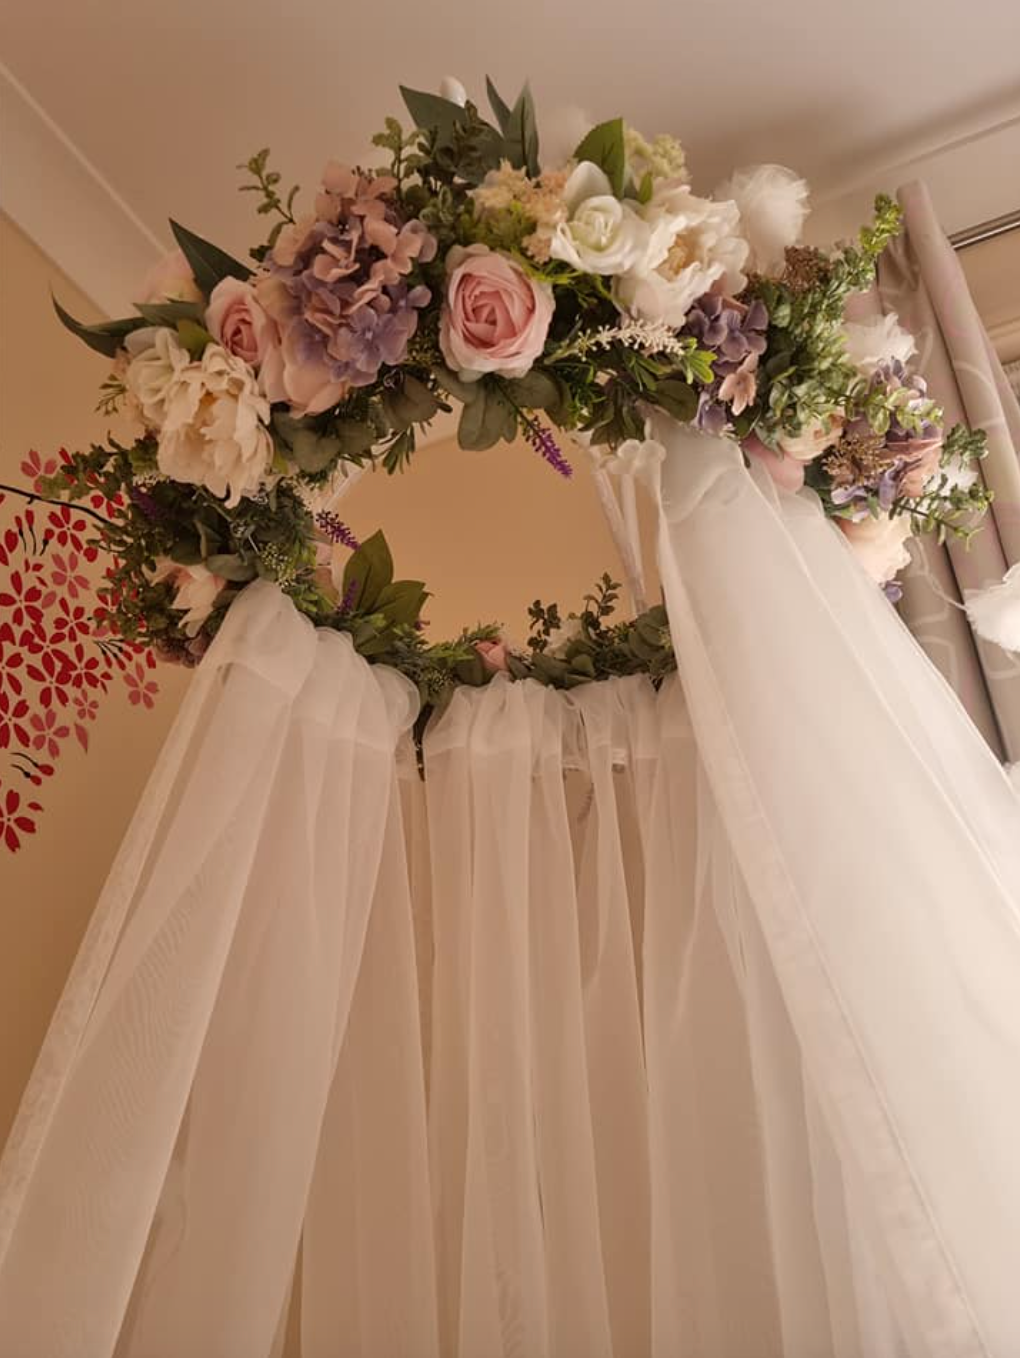 DIY floral canopy using Kmart flowers